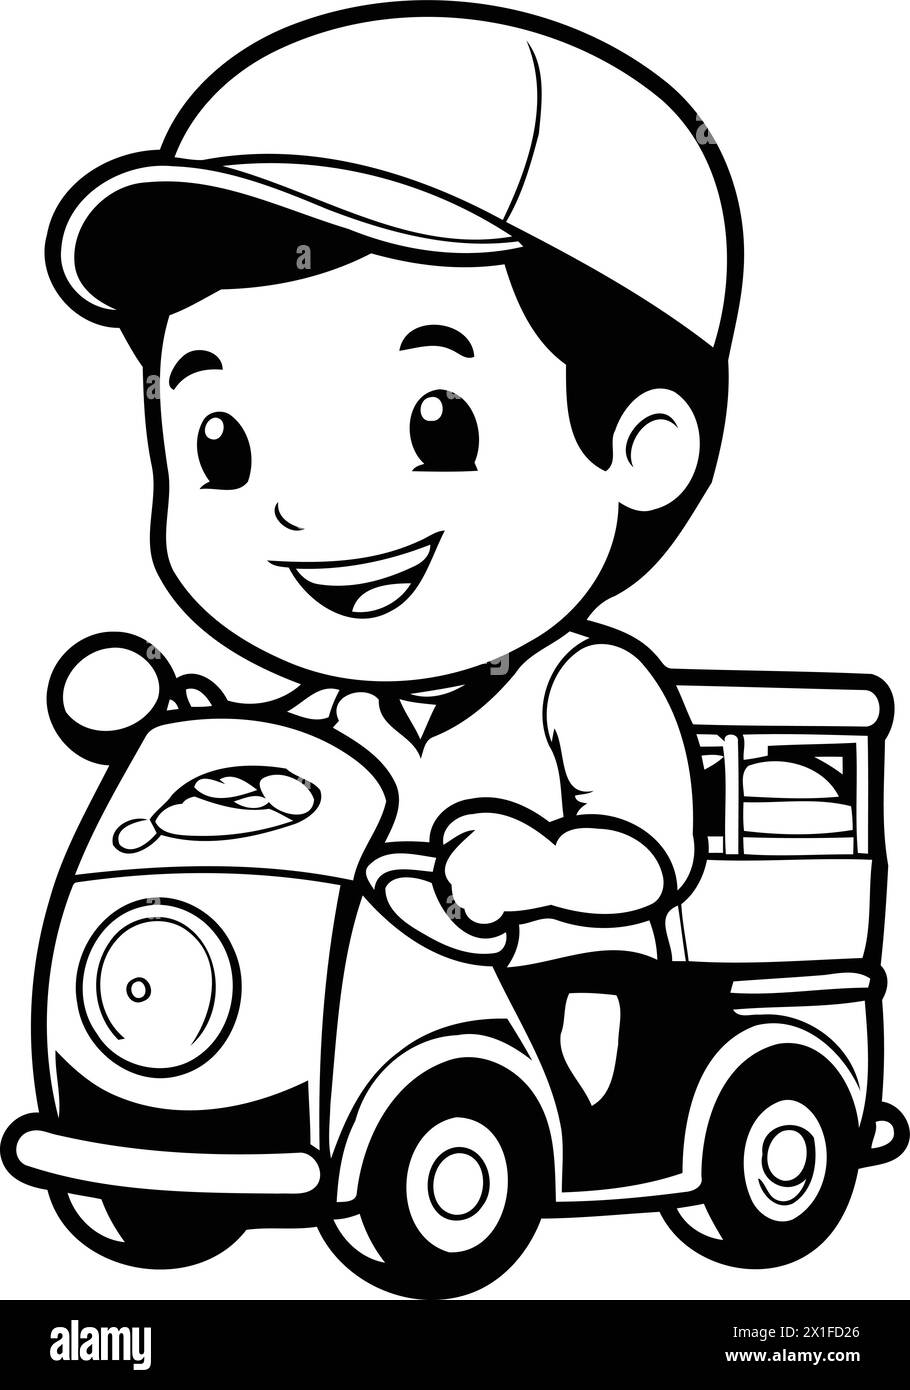 Cute cartoon delivery boy on a toy car. Vector illustration. Stock Vector